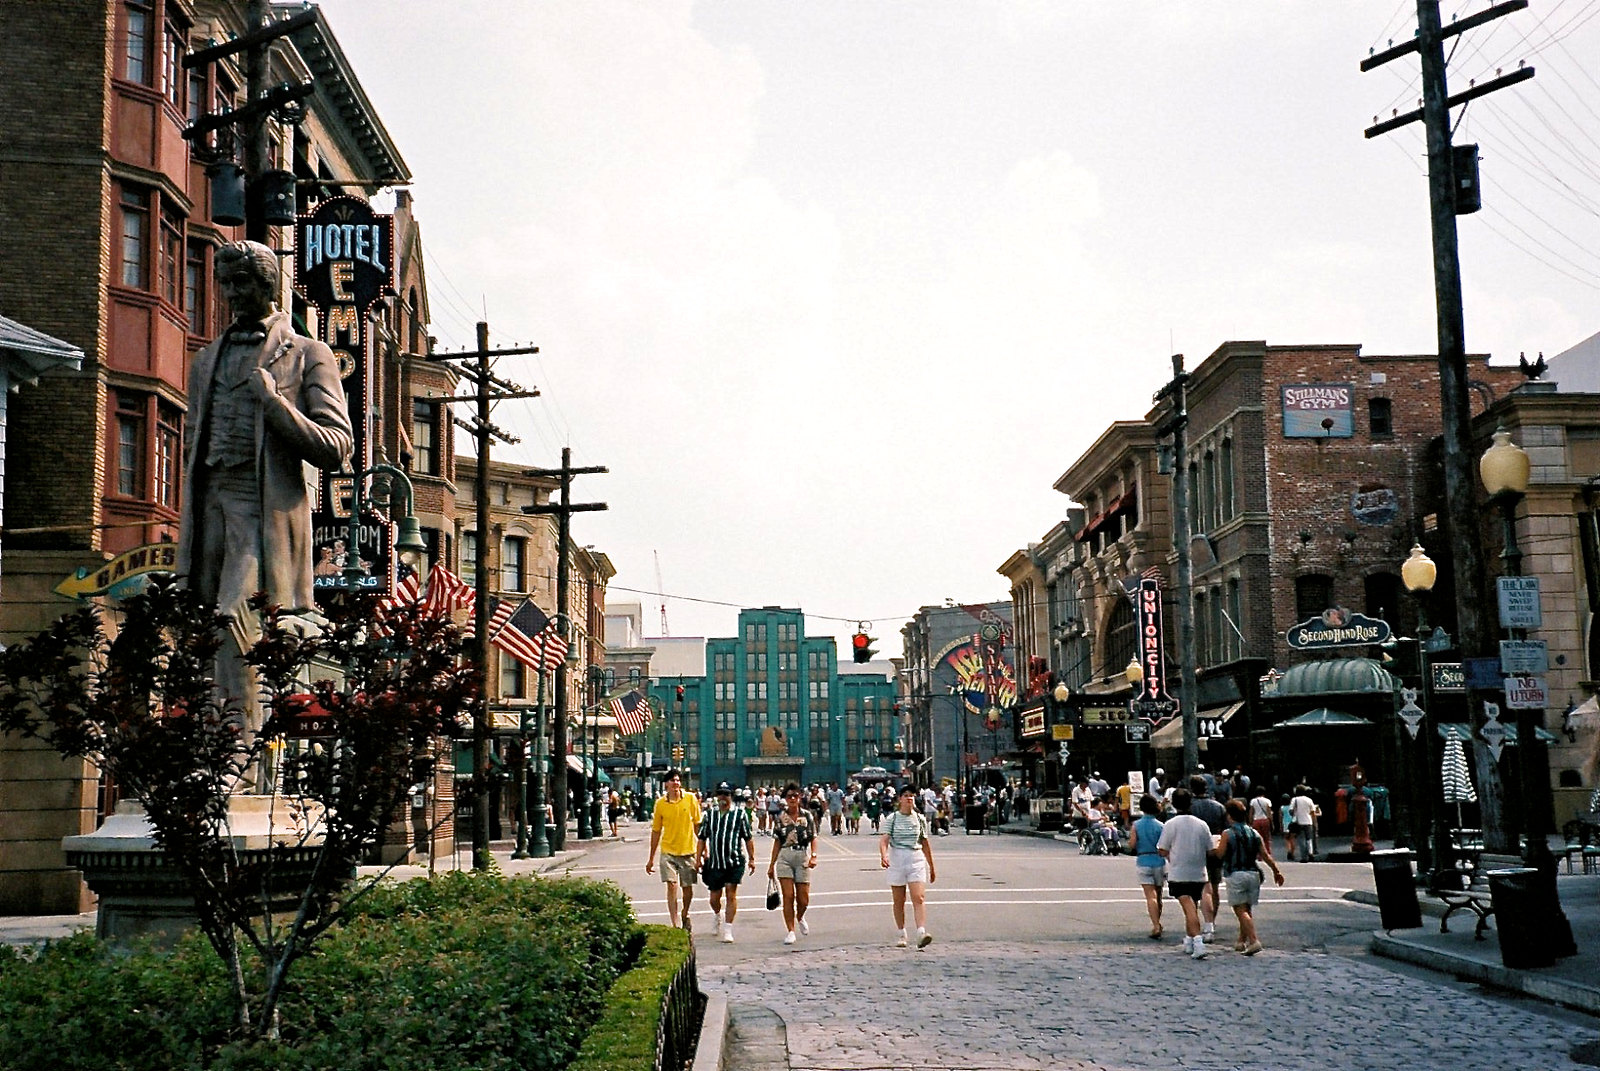 The Islands of Adventure Preview Center in the distance